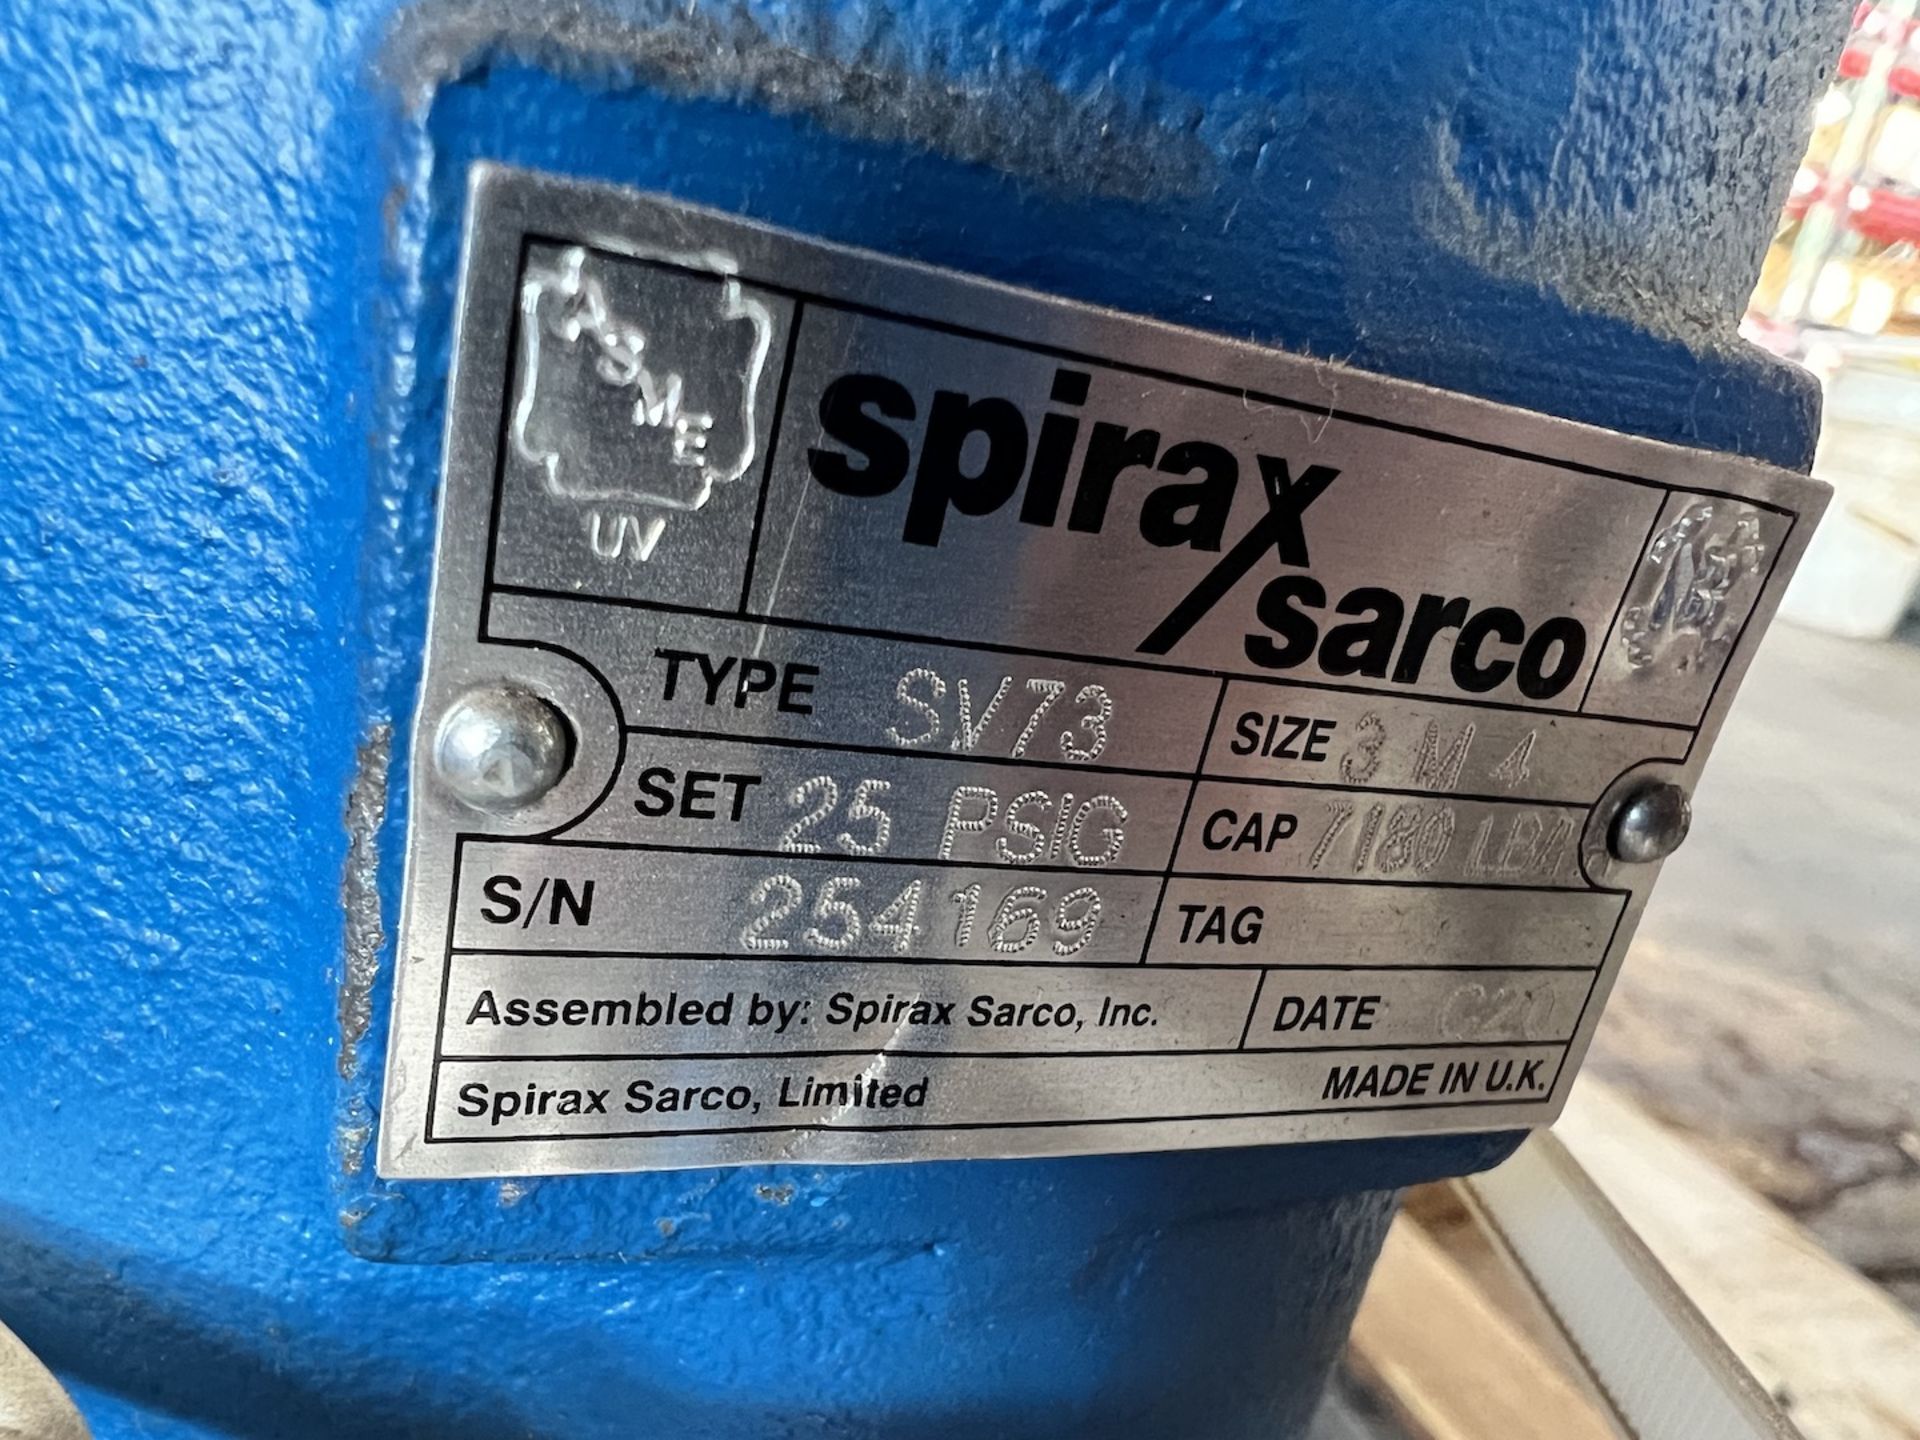 NEW SPIRAX SARCO SAFETY RELIEF VALVE, MODEL SV73, S/N 254169 - Image 8 of 9